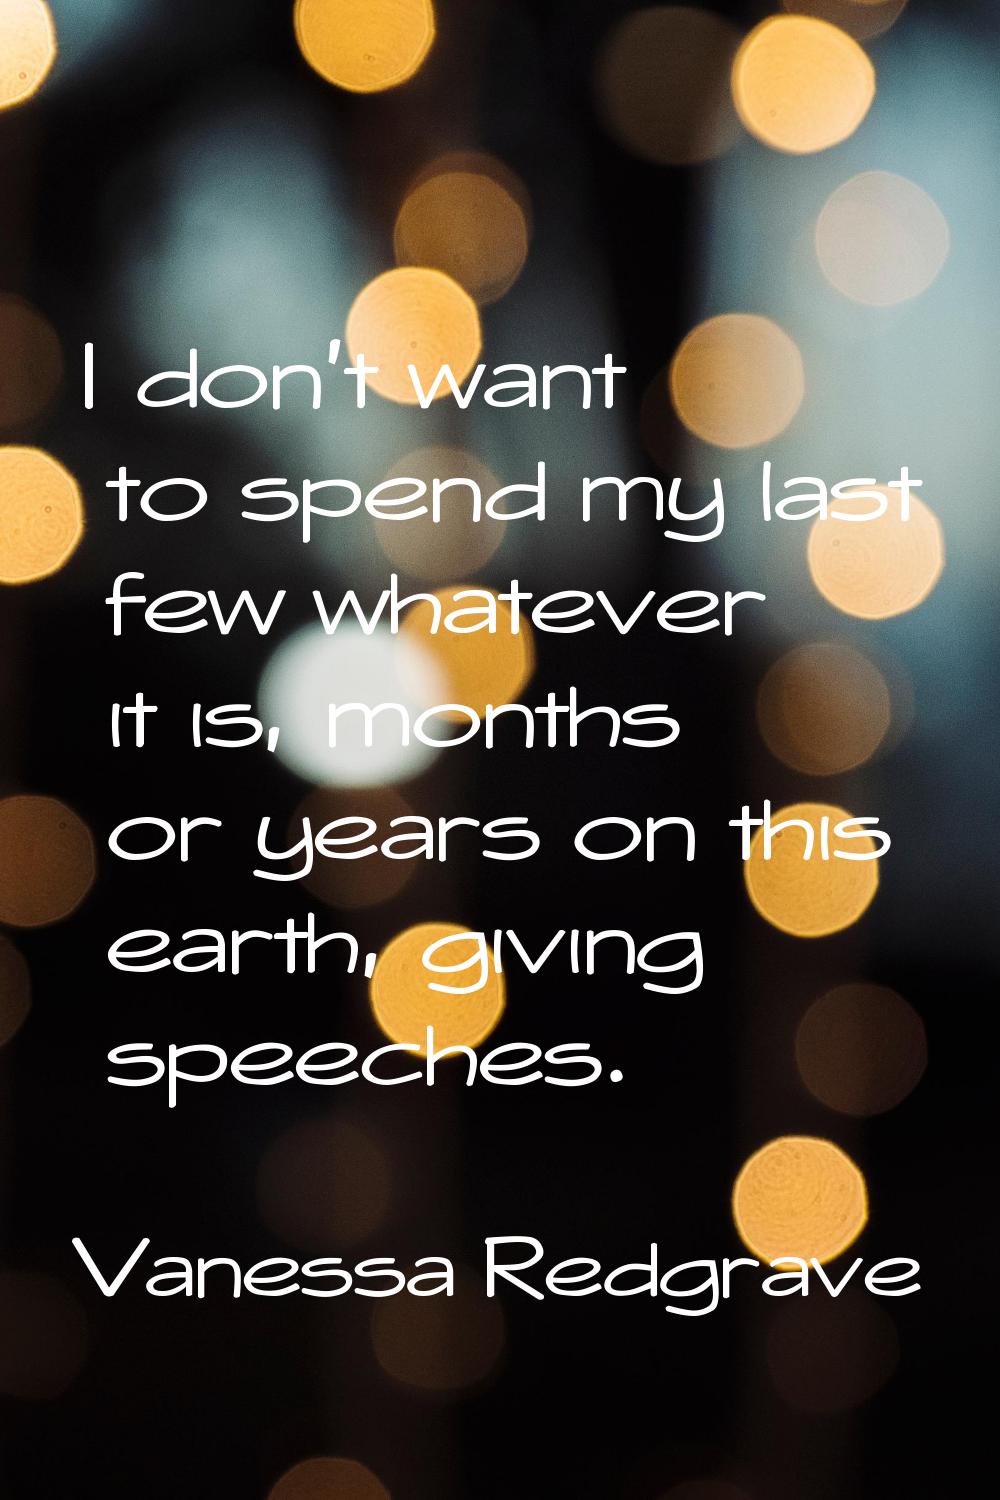 I don't want to spend my last few whatever it is, months or years on this earth, giving speeches.